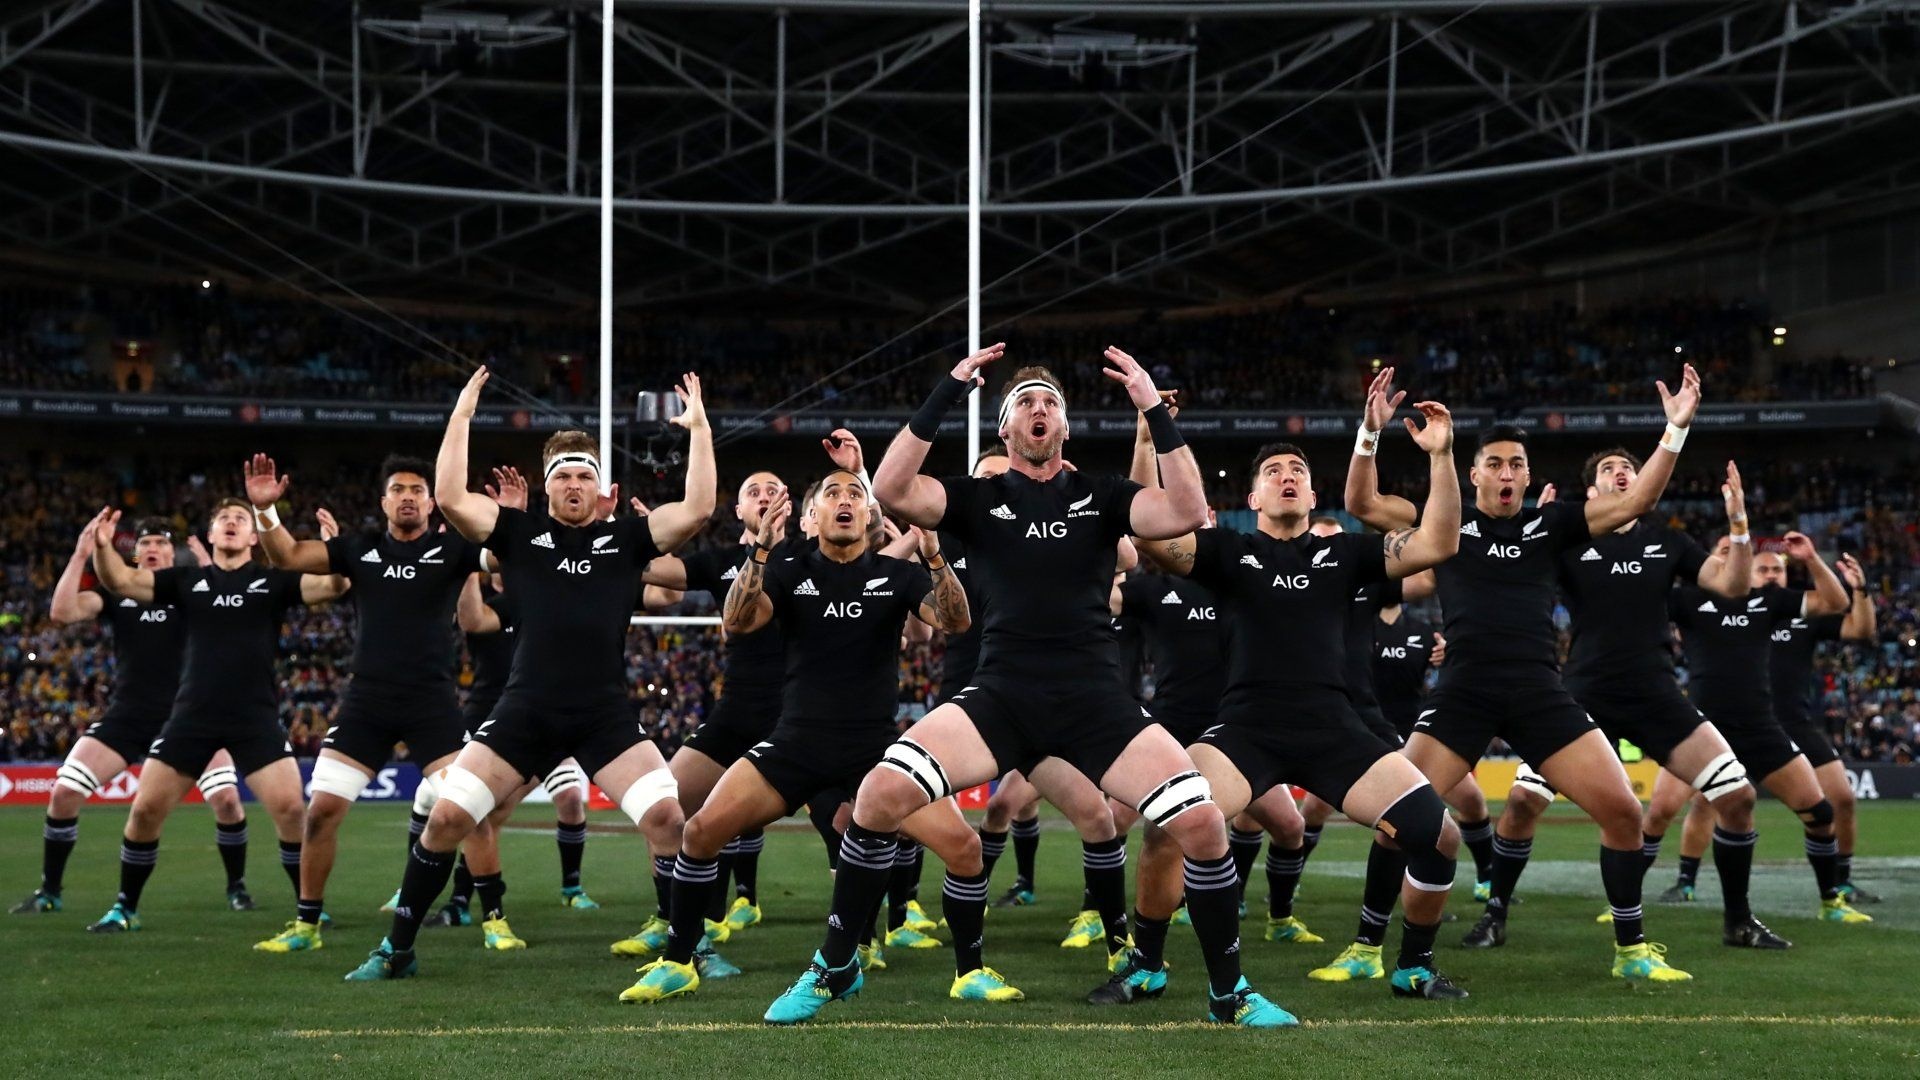 Haka: The use of Maori dance by the All Blacks rugby team, Pre-match tradition. 1920x1080 Full HD Background.